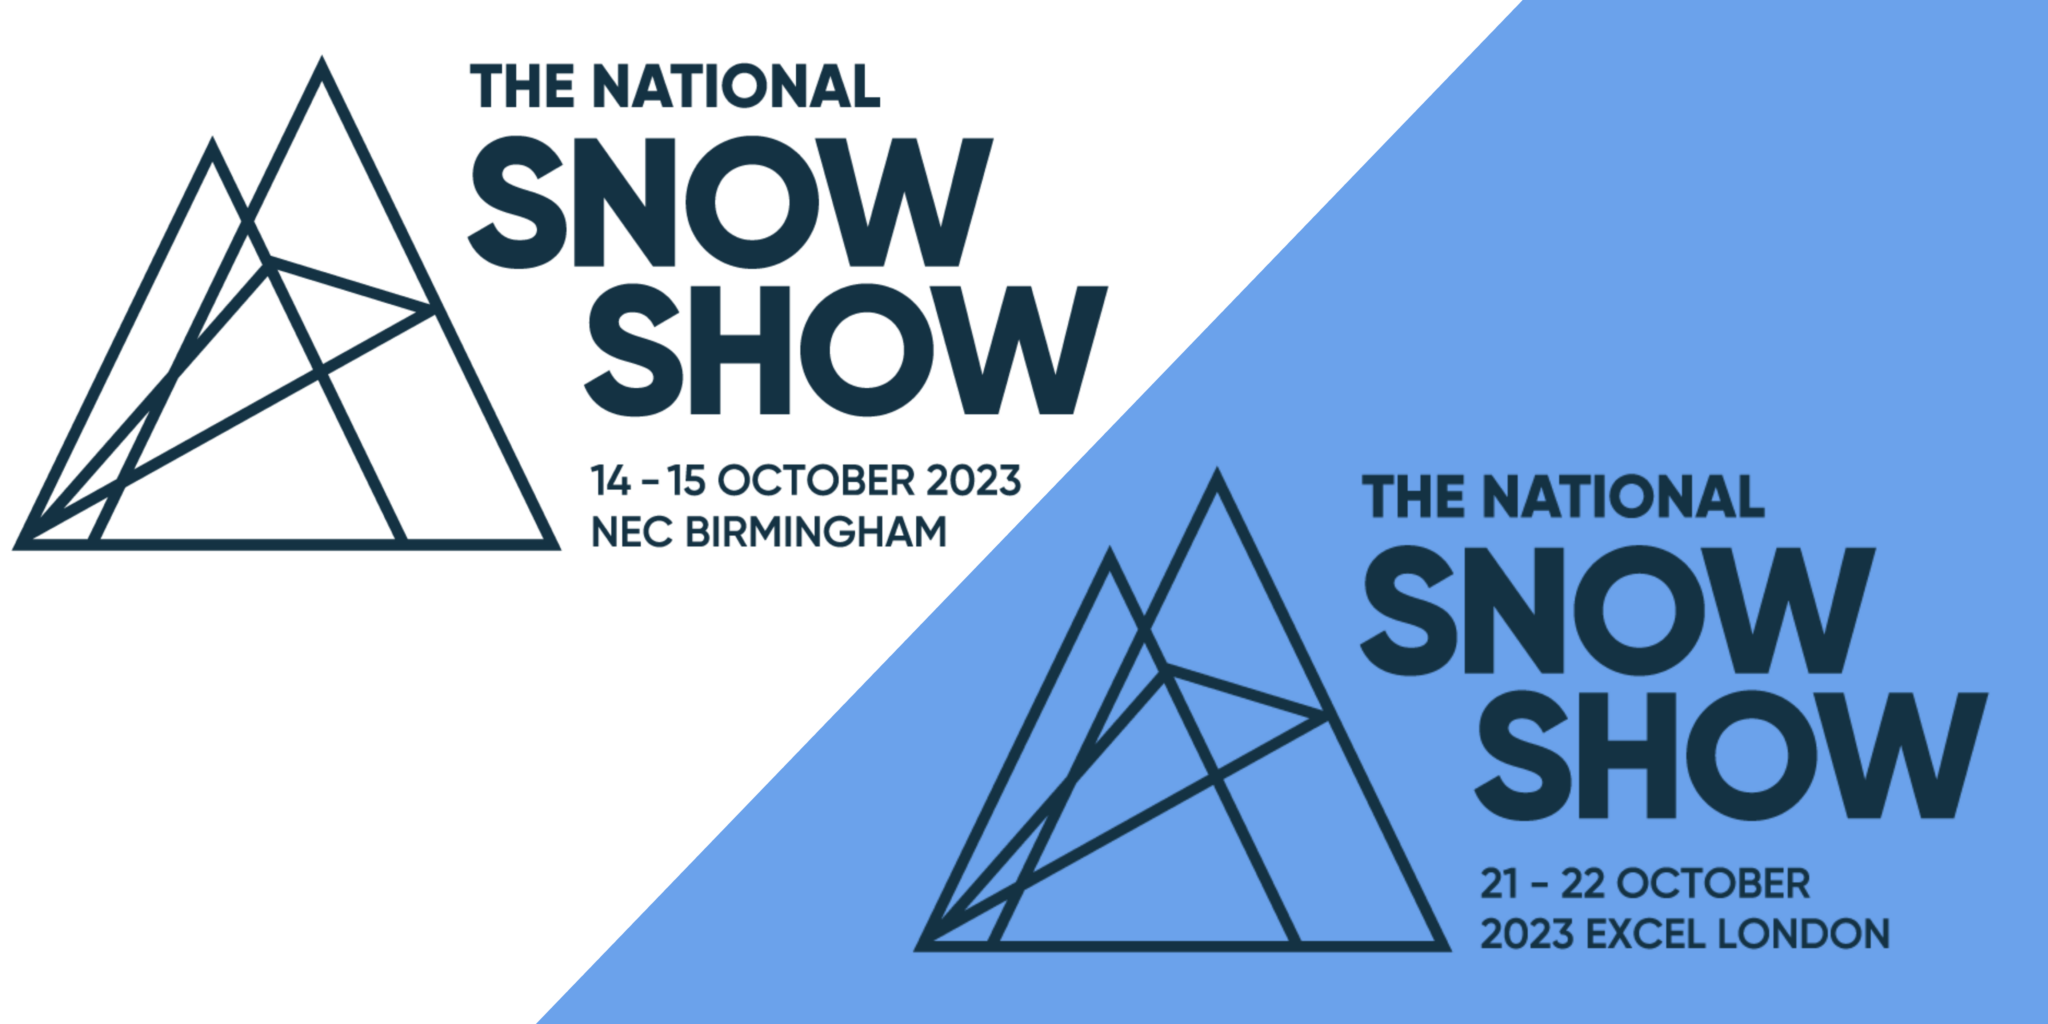 Free tickets to the 2023 National Snow Show Fall Line Skiing